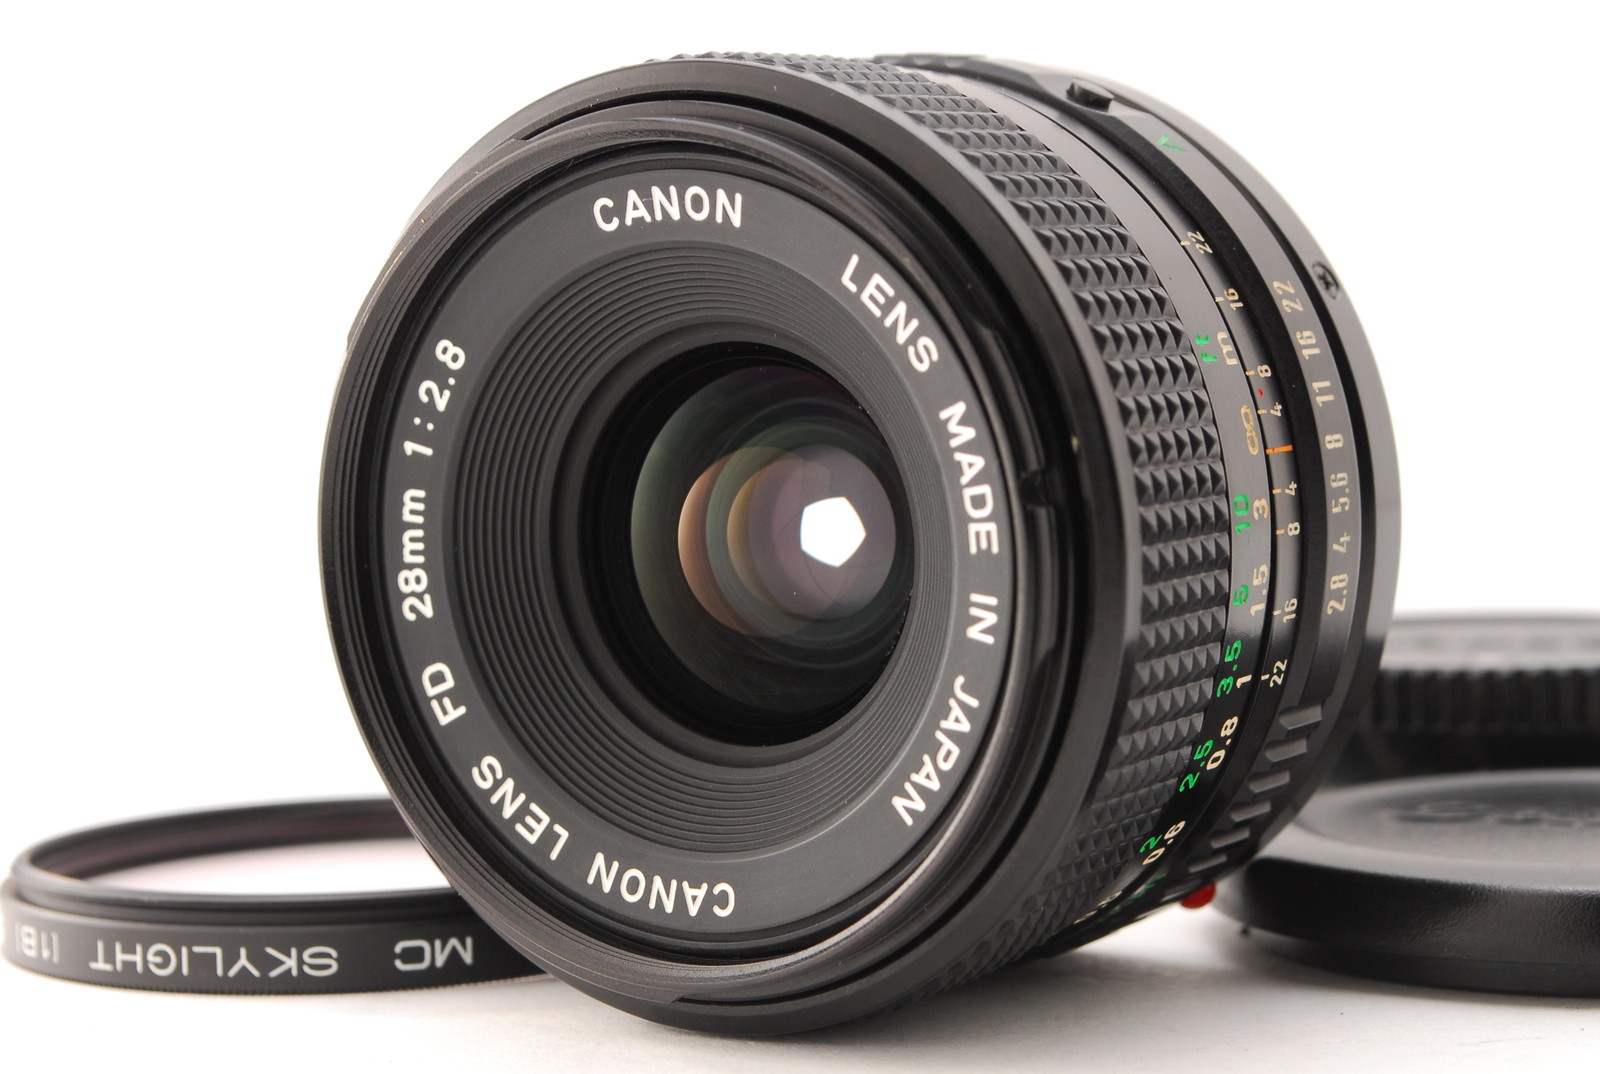 PROMOTION.😊 NEAR MINT Canon 28mm f/2.8 NEW FD Manual Focus Lens, Caps, Filter from Japan